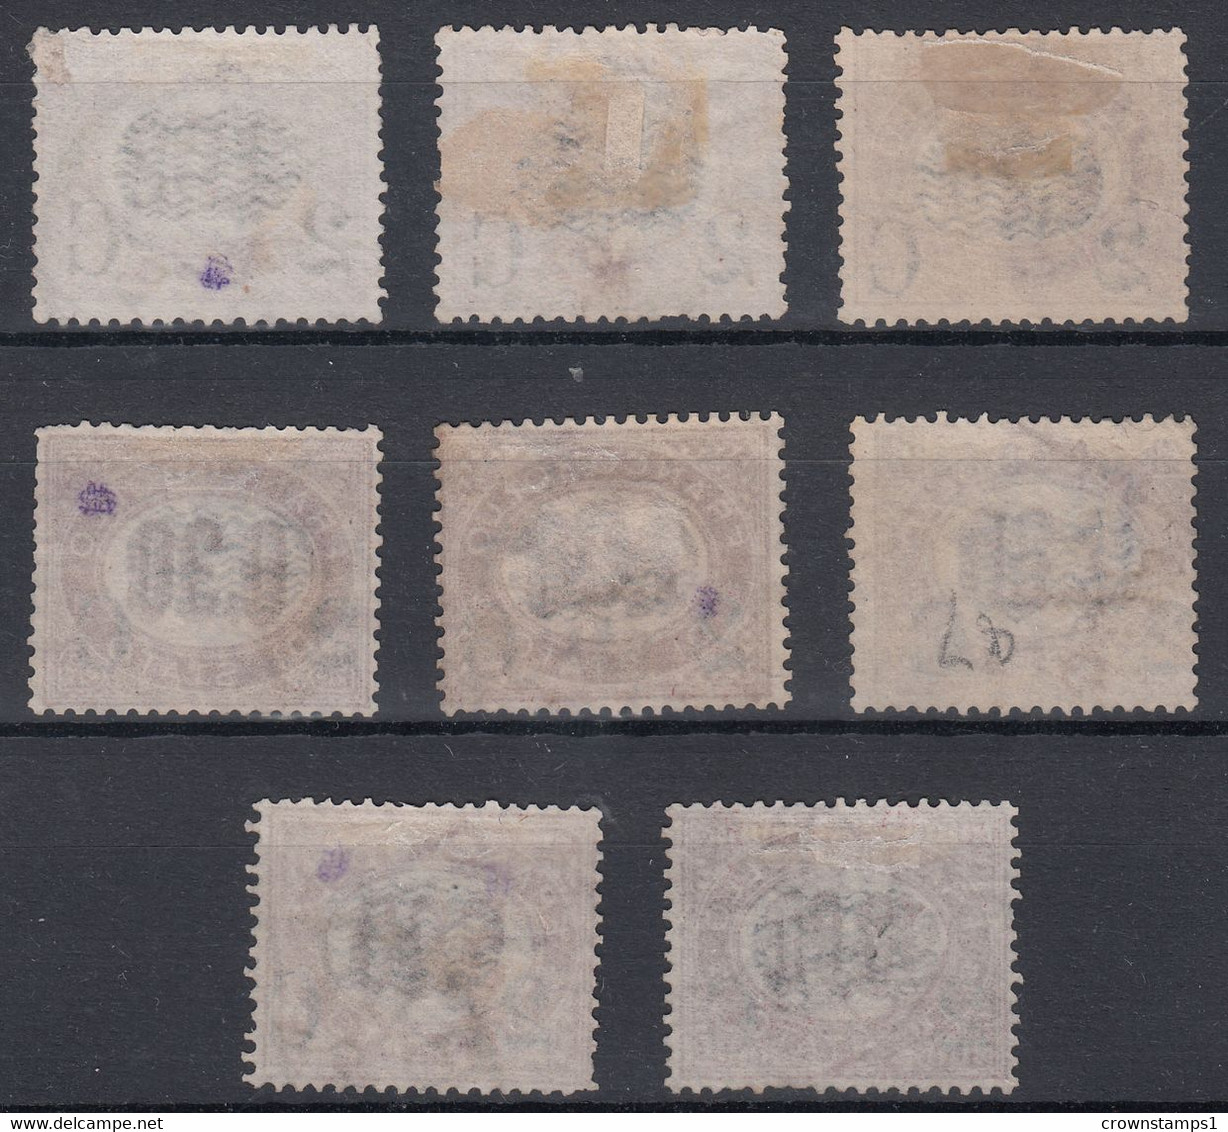 1877 ITALY OFFICIAL STAMPS SURCHARGED IN BLUE (YVERT# 25-32) USED FINE - Officials